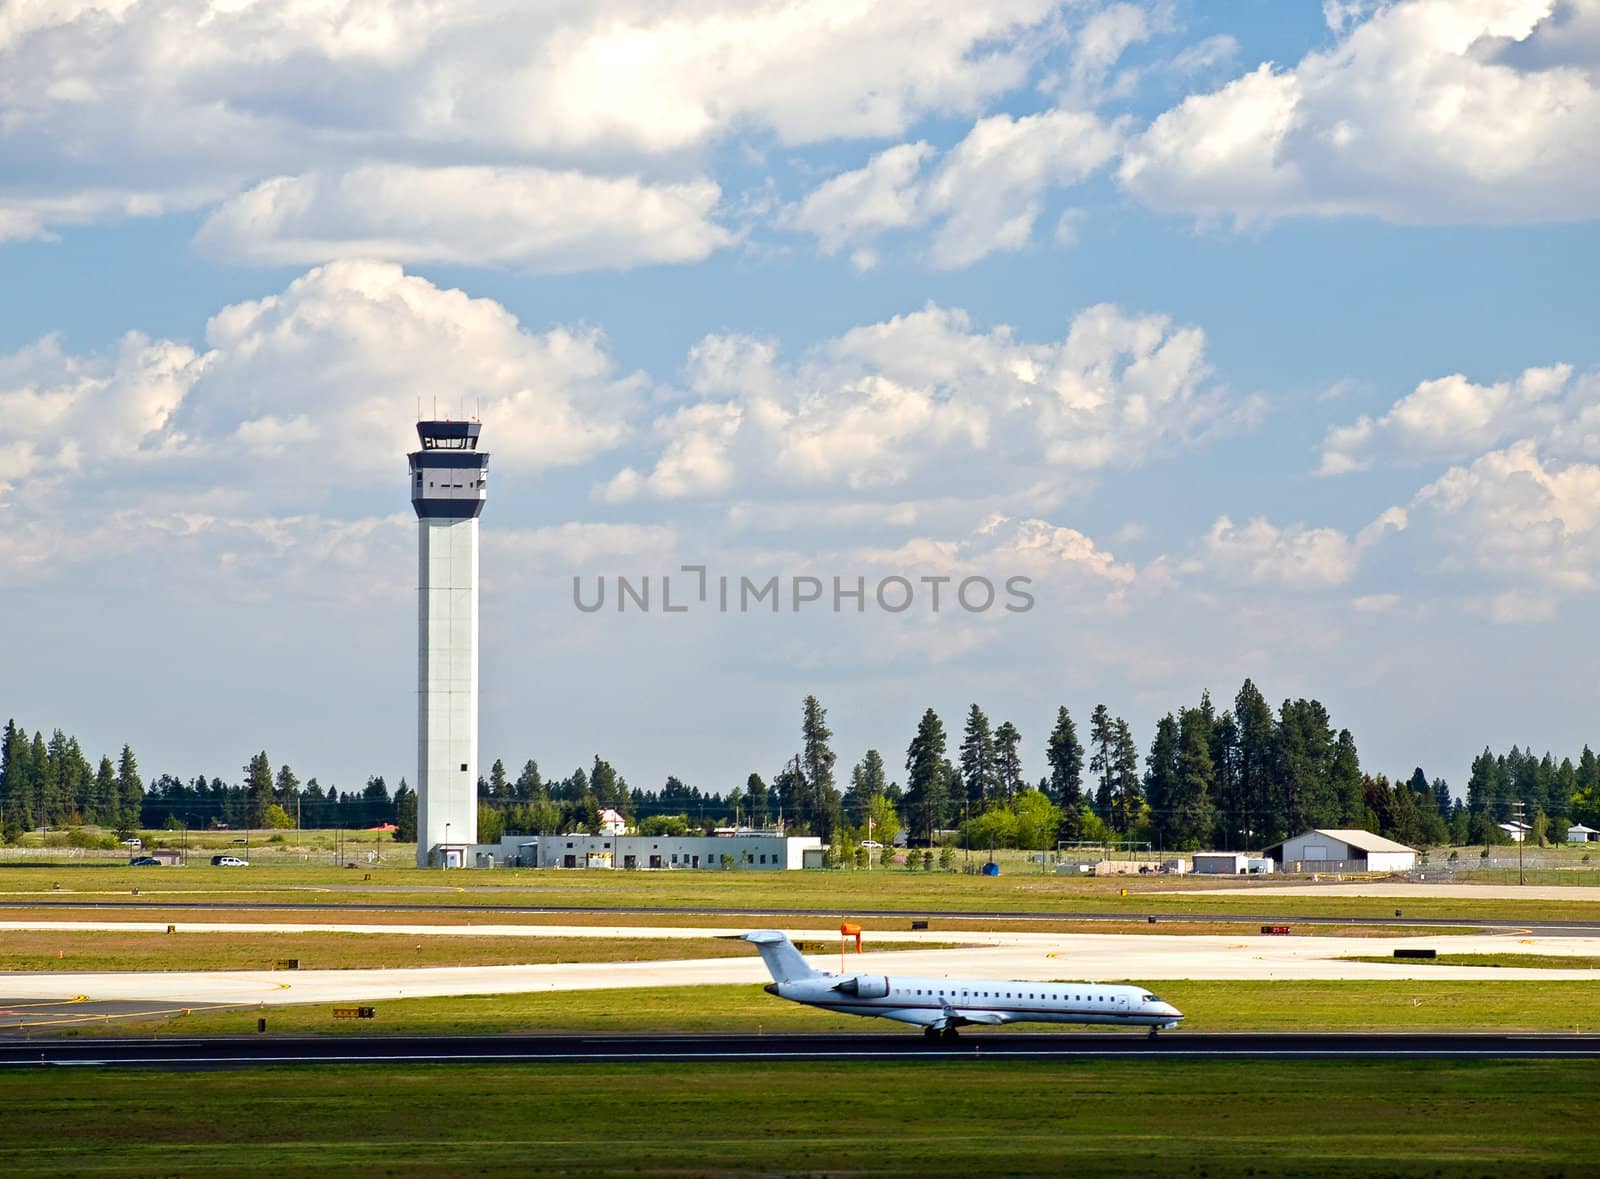 Air Traffic Control Tower of a Modern Airport with Aircraft Taking Off